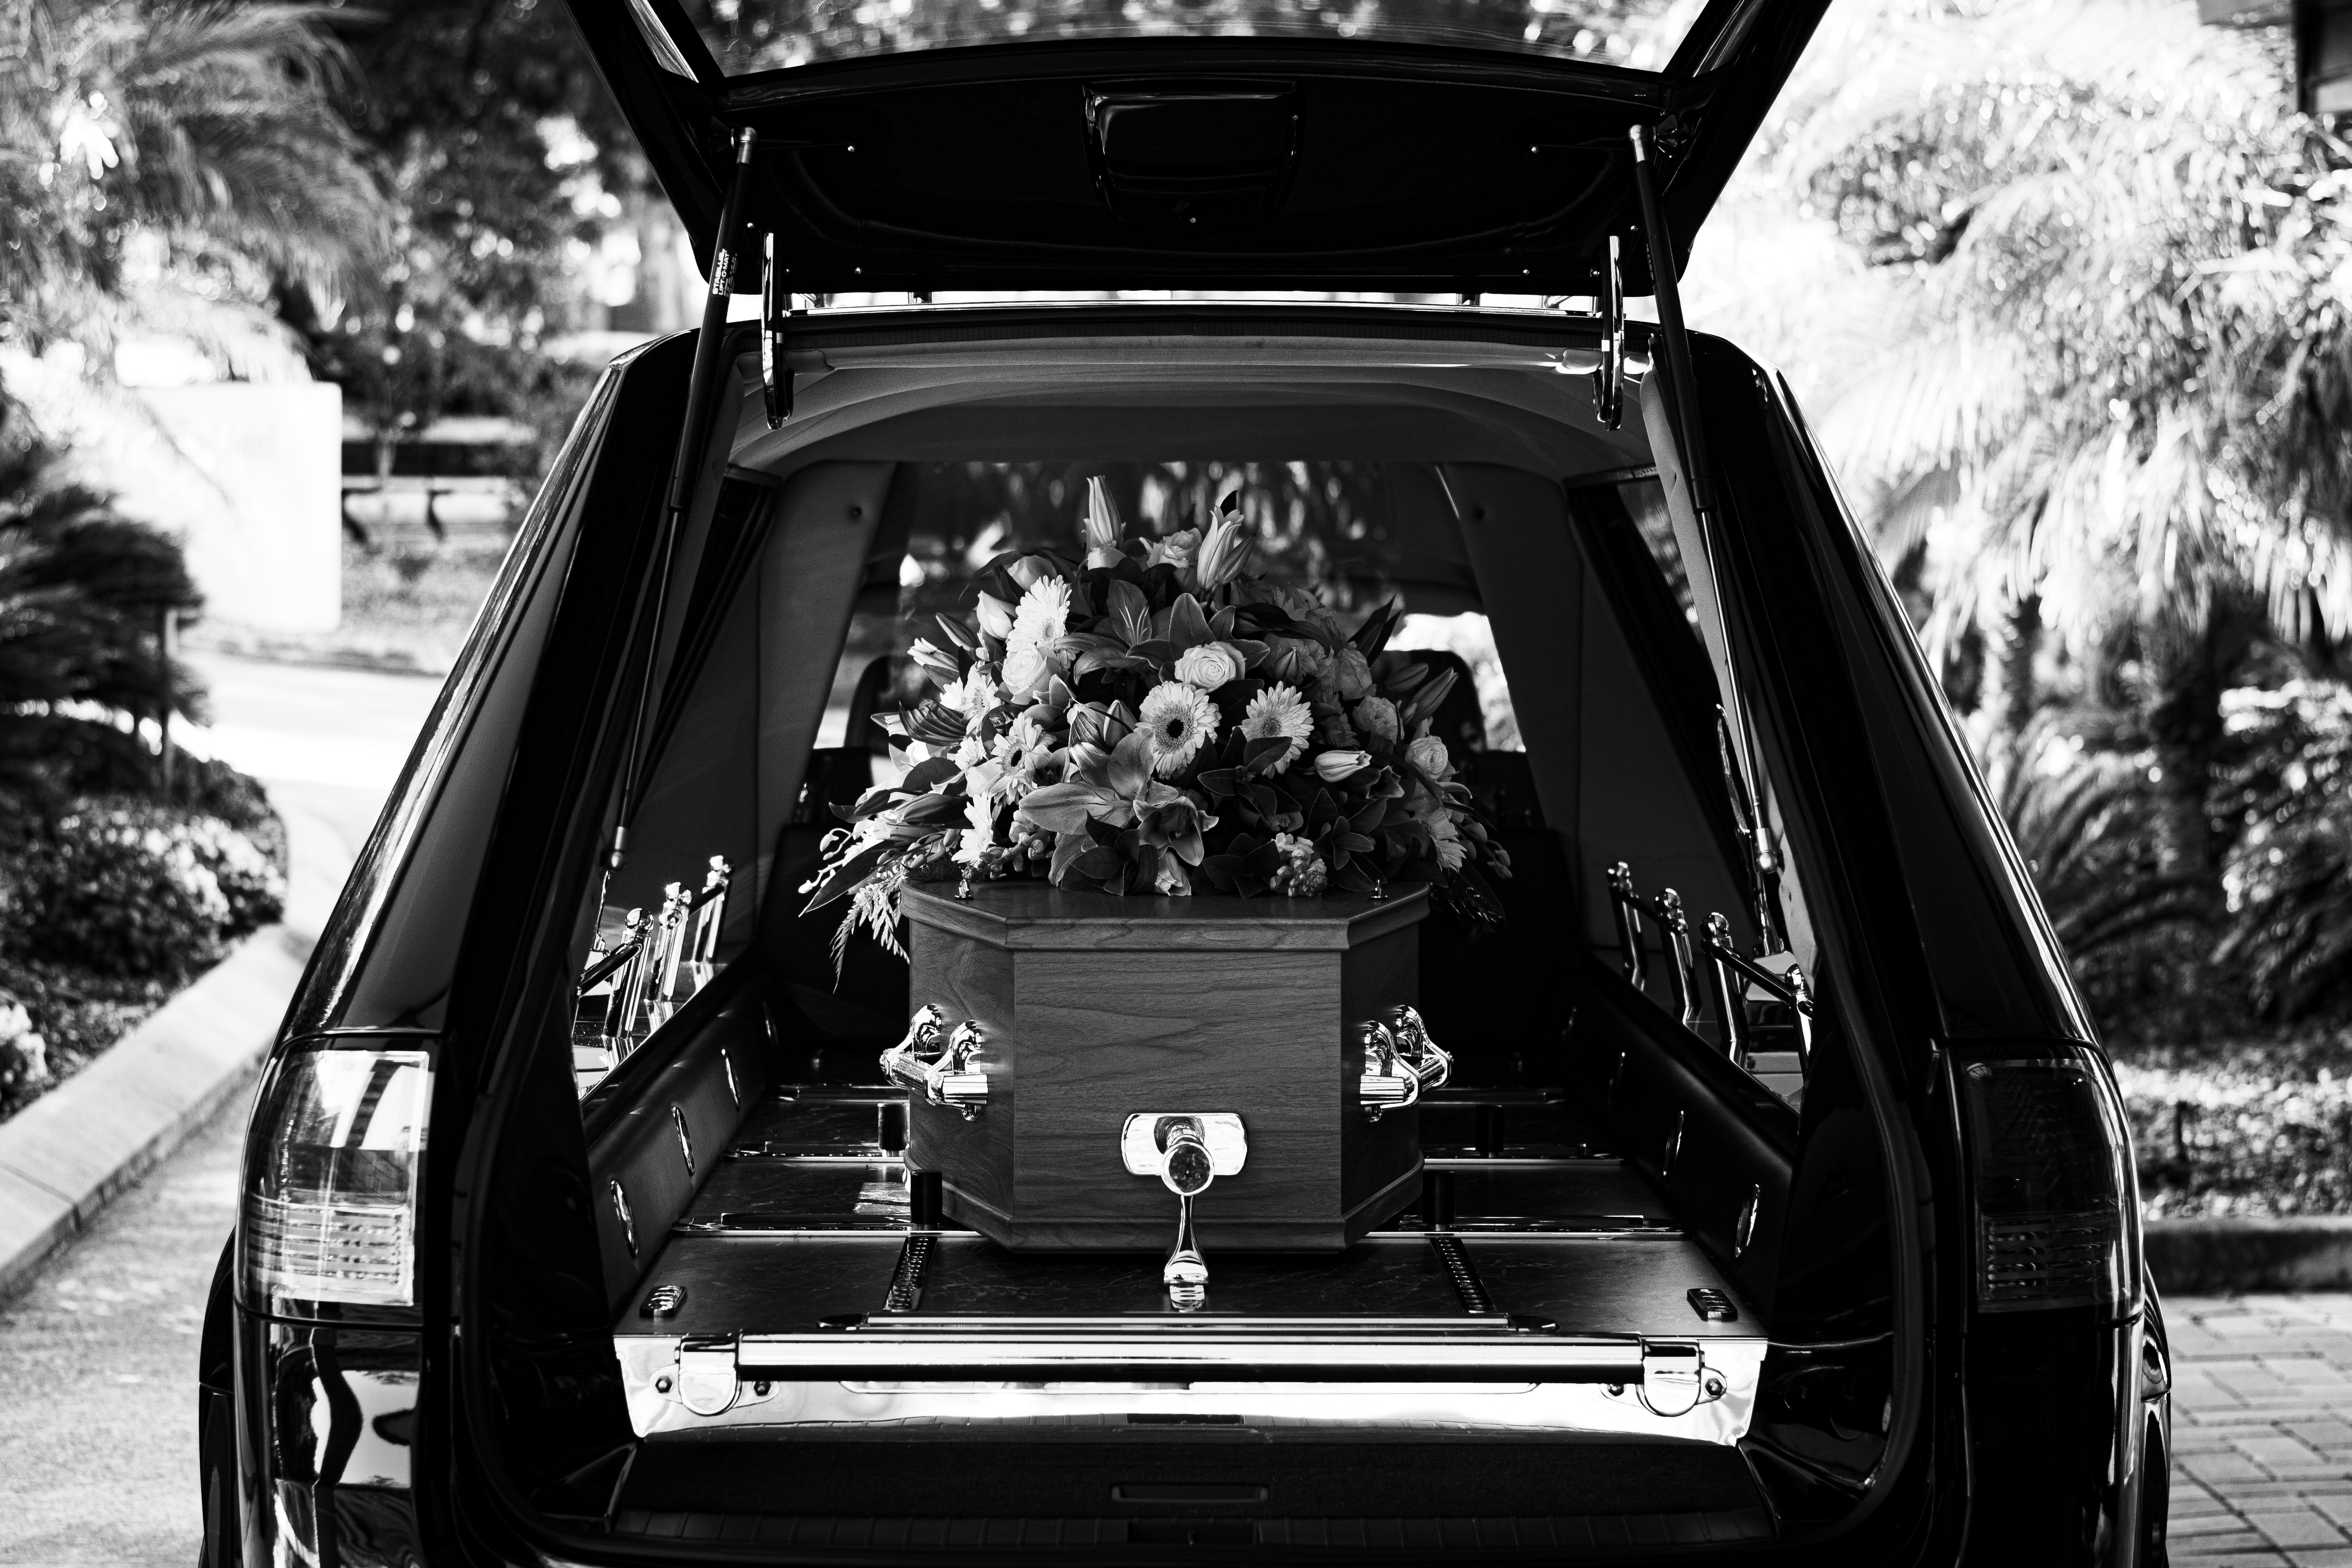 A coffin in the back of a car | Source: Unsplash